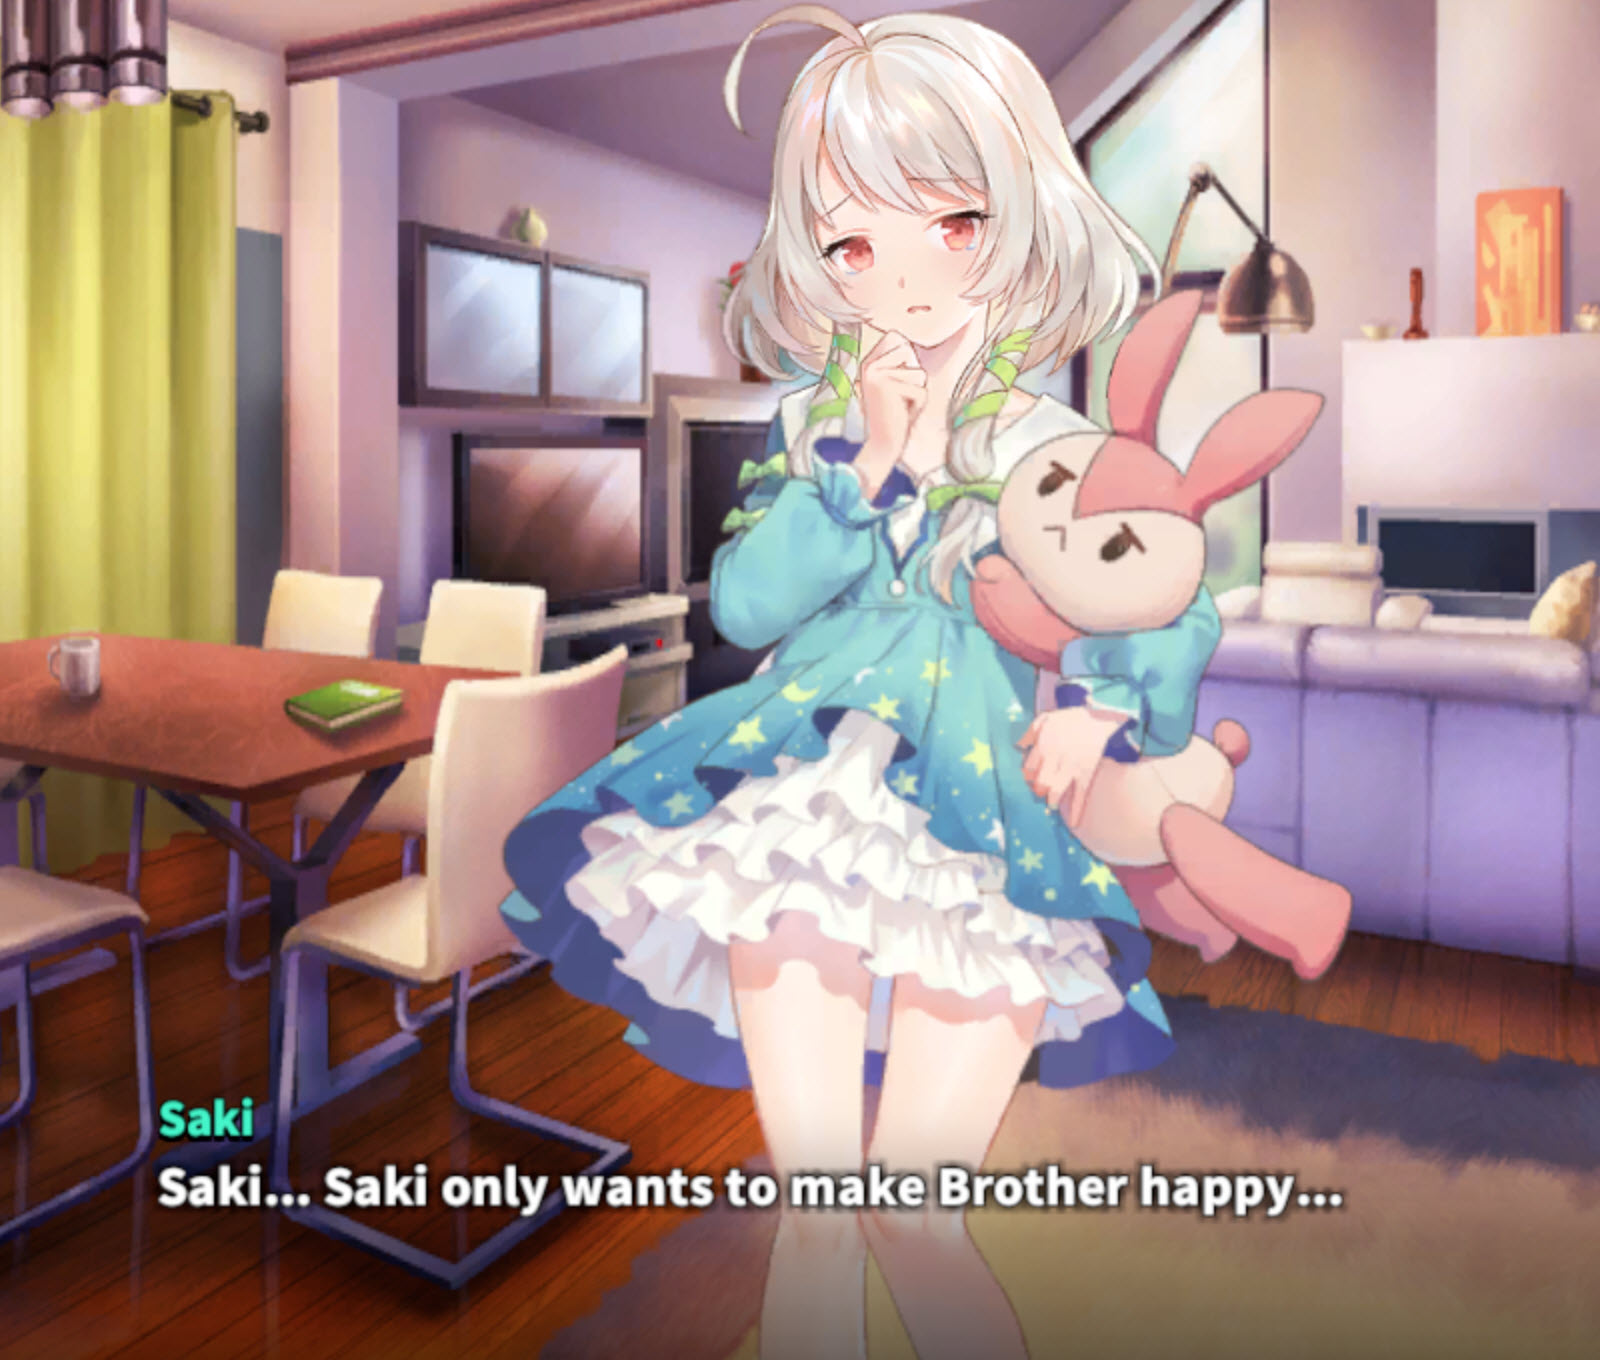 Saki will do everything for brother